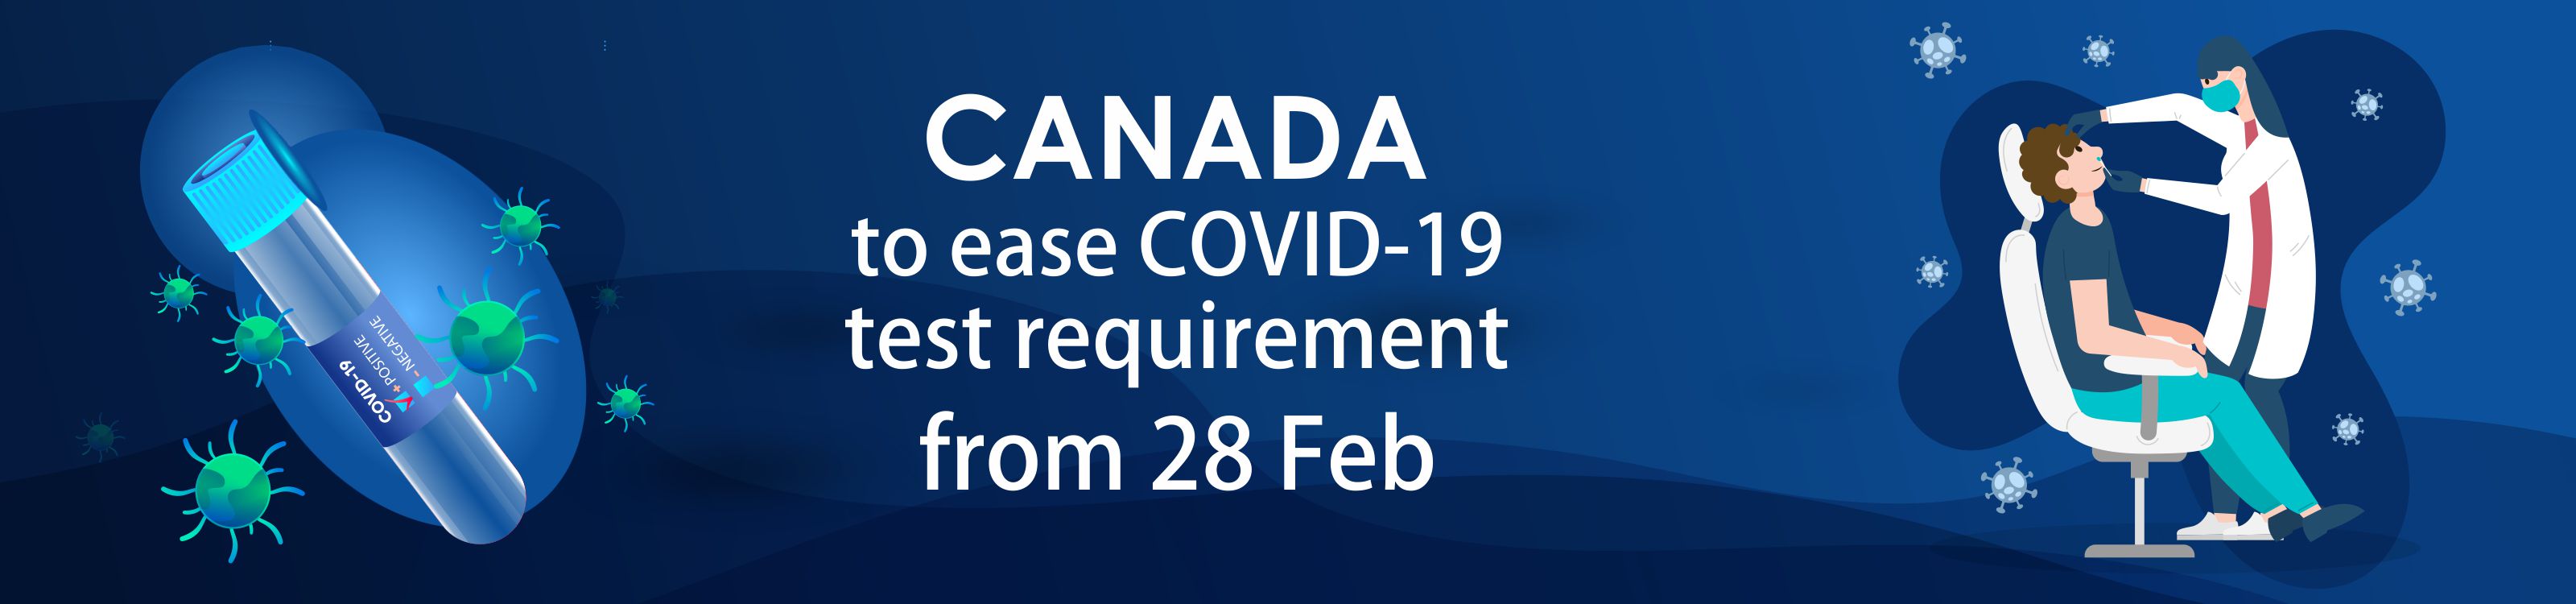 Canada to Ease Covid-19 Test Requirement from 28 Feb